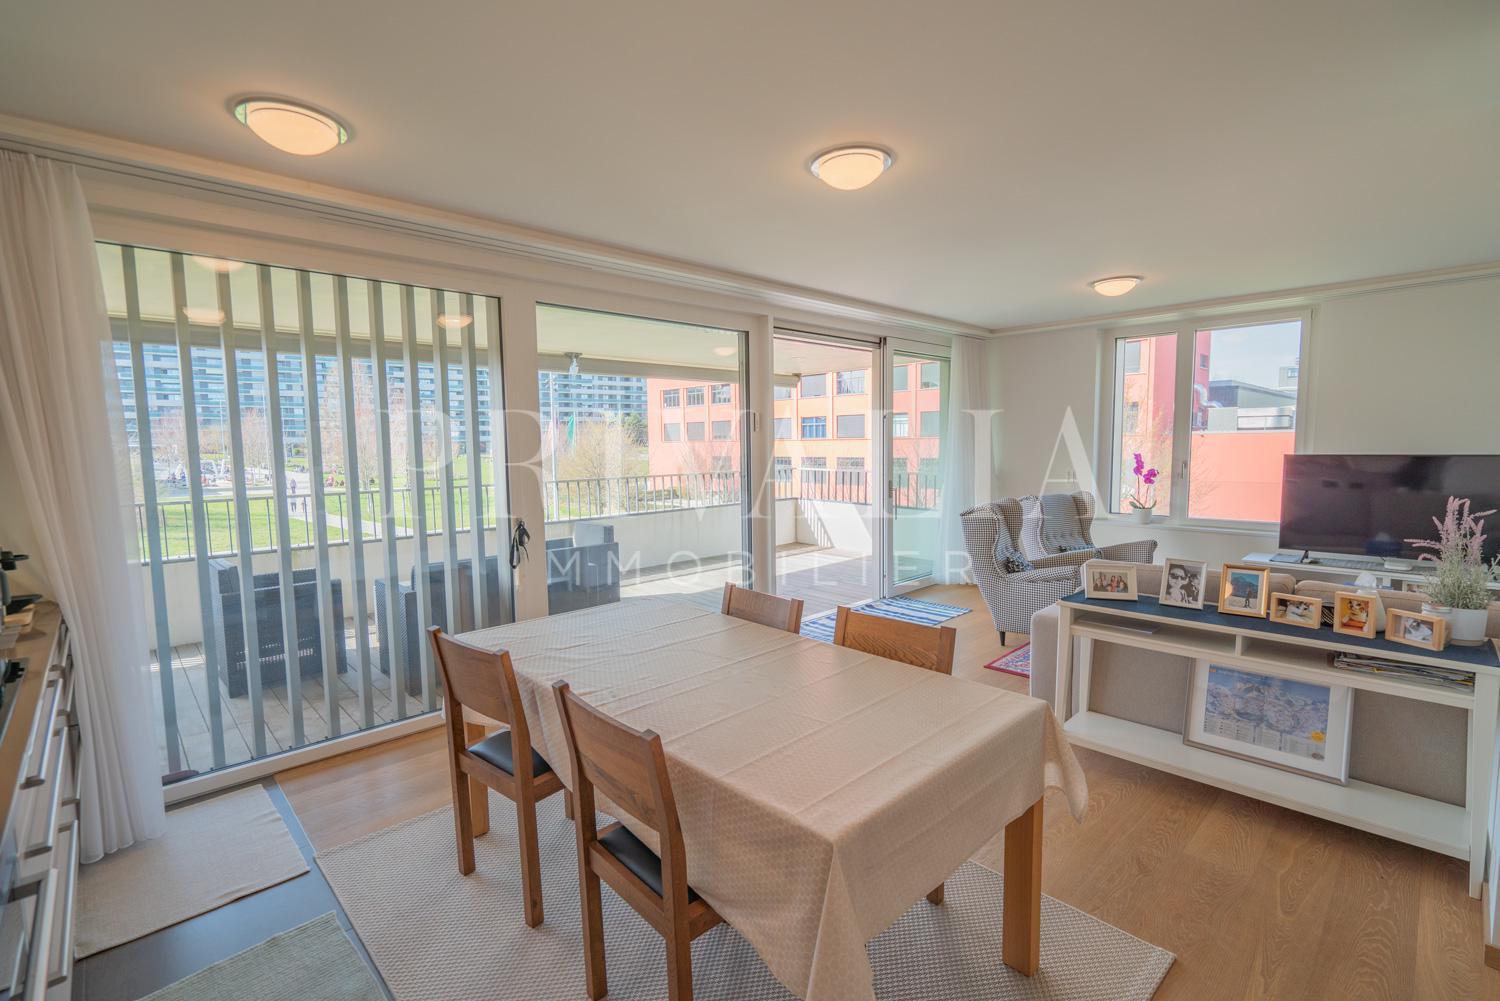 PrivaliaElegant crossing flat with terrace and open view on a park